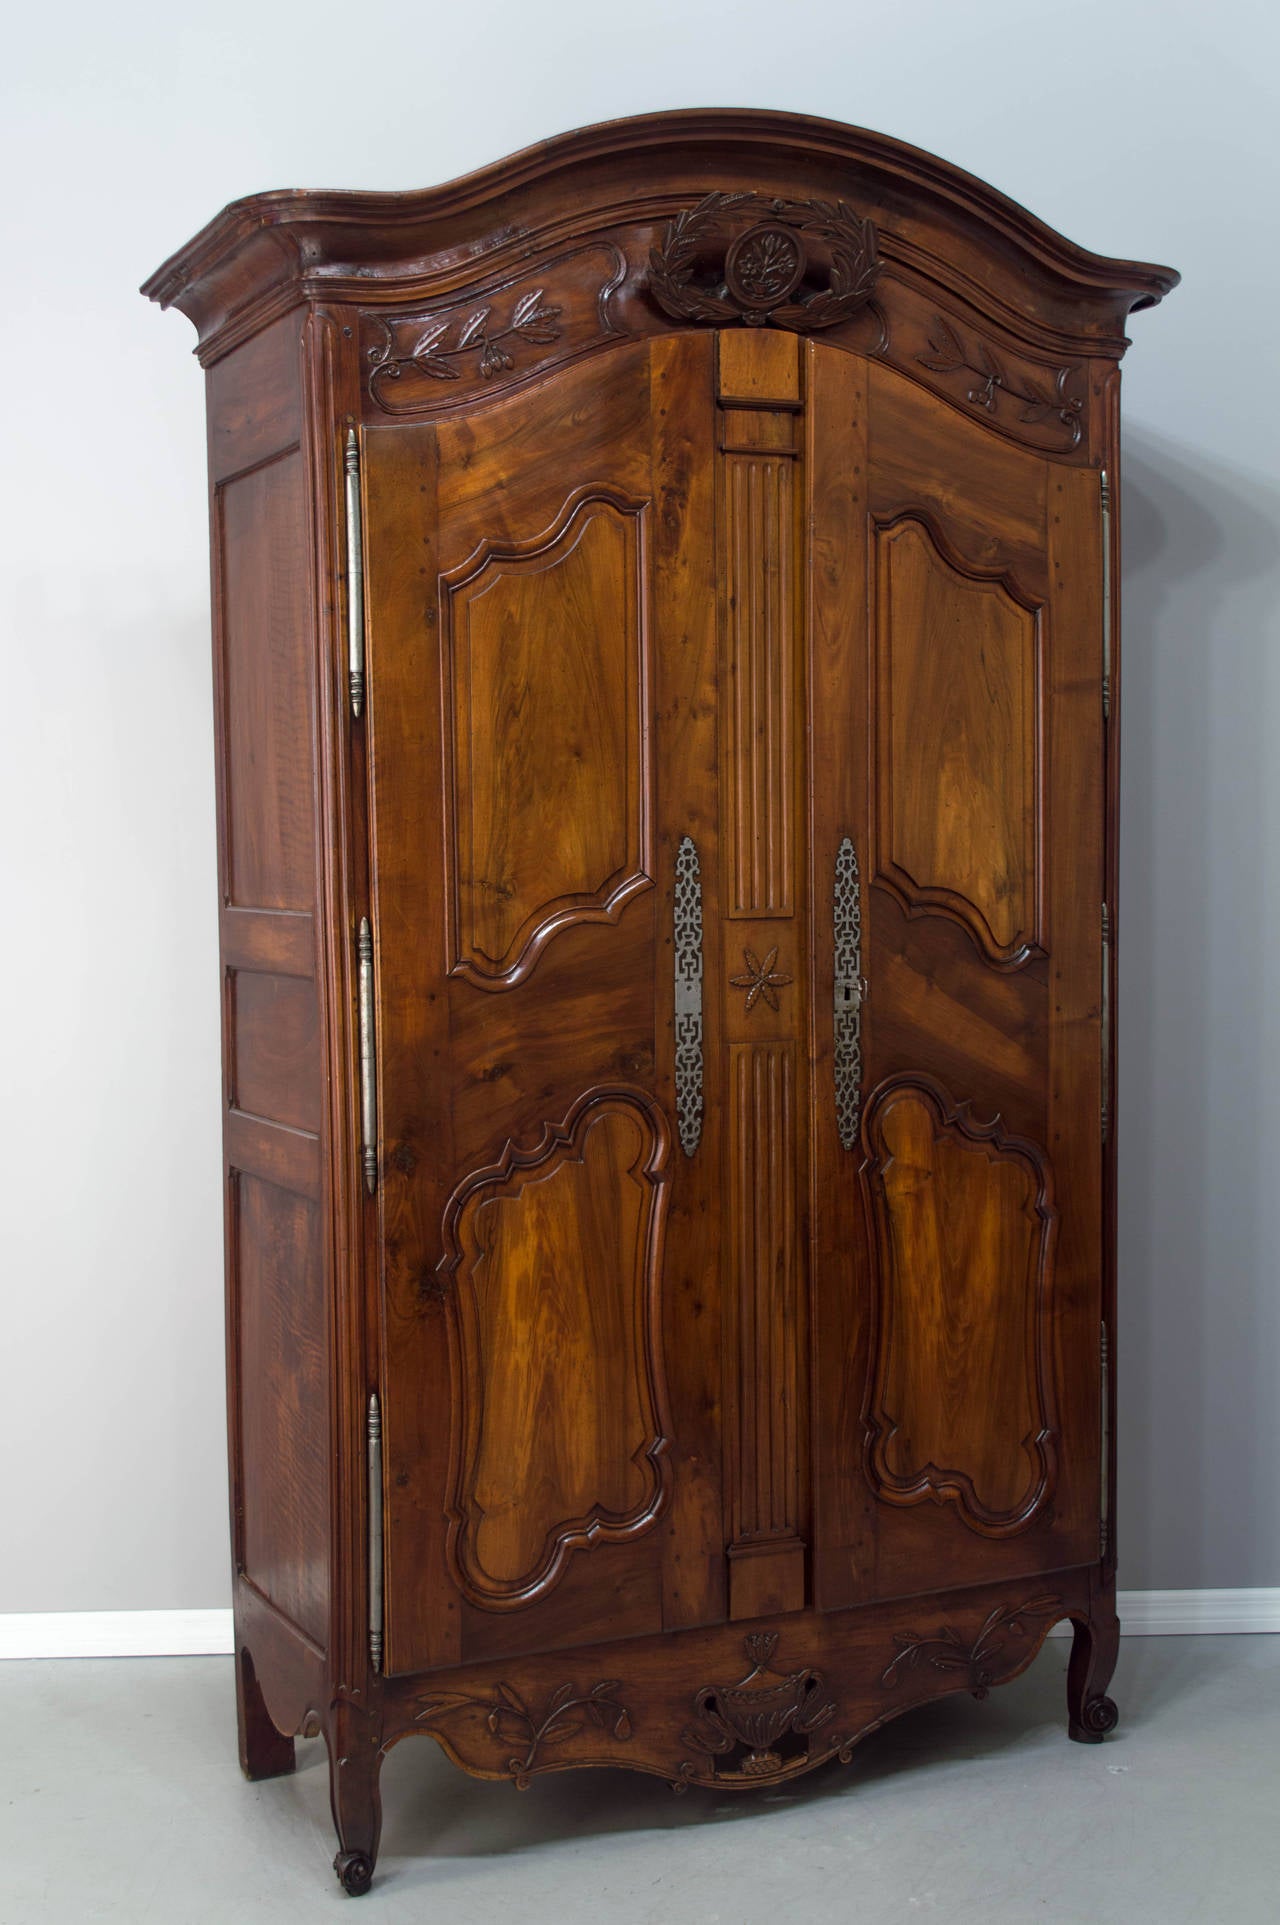 An 18th century bridal armoire from Provence, made of solid walnut with a chapeau de gendarme crown above a hand-carved olive wreath. Two doors having two raised panels each, opening to three shelves, one having a set of two drawers and below, a